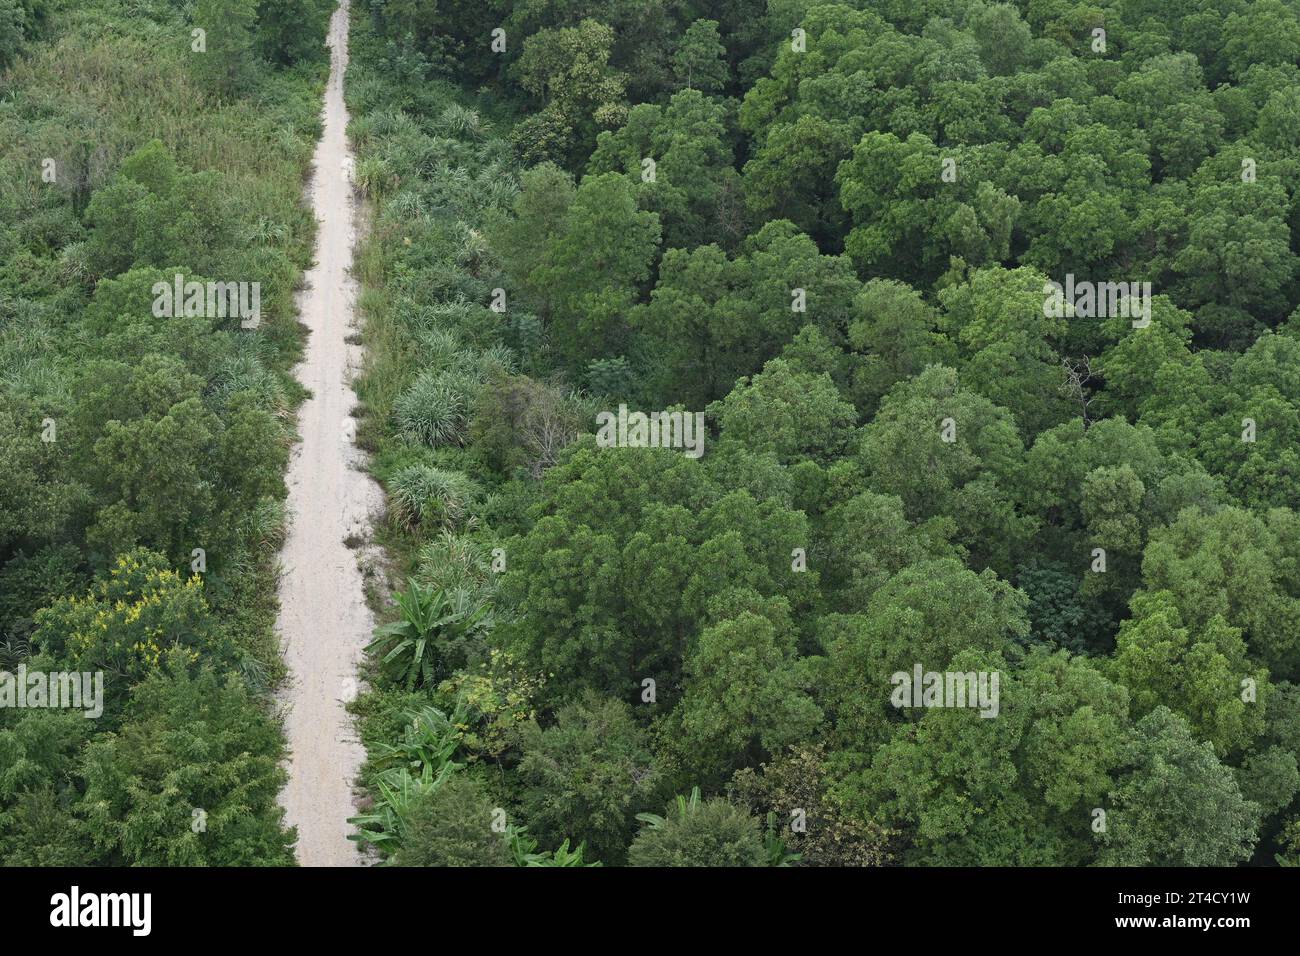 View of a road in the forest inside Bai Dinh Pagoda, a Buddhist temple complex located on Bai Dinh Mountain near Ninh Binh, Vietnam Stock Photo